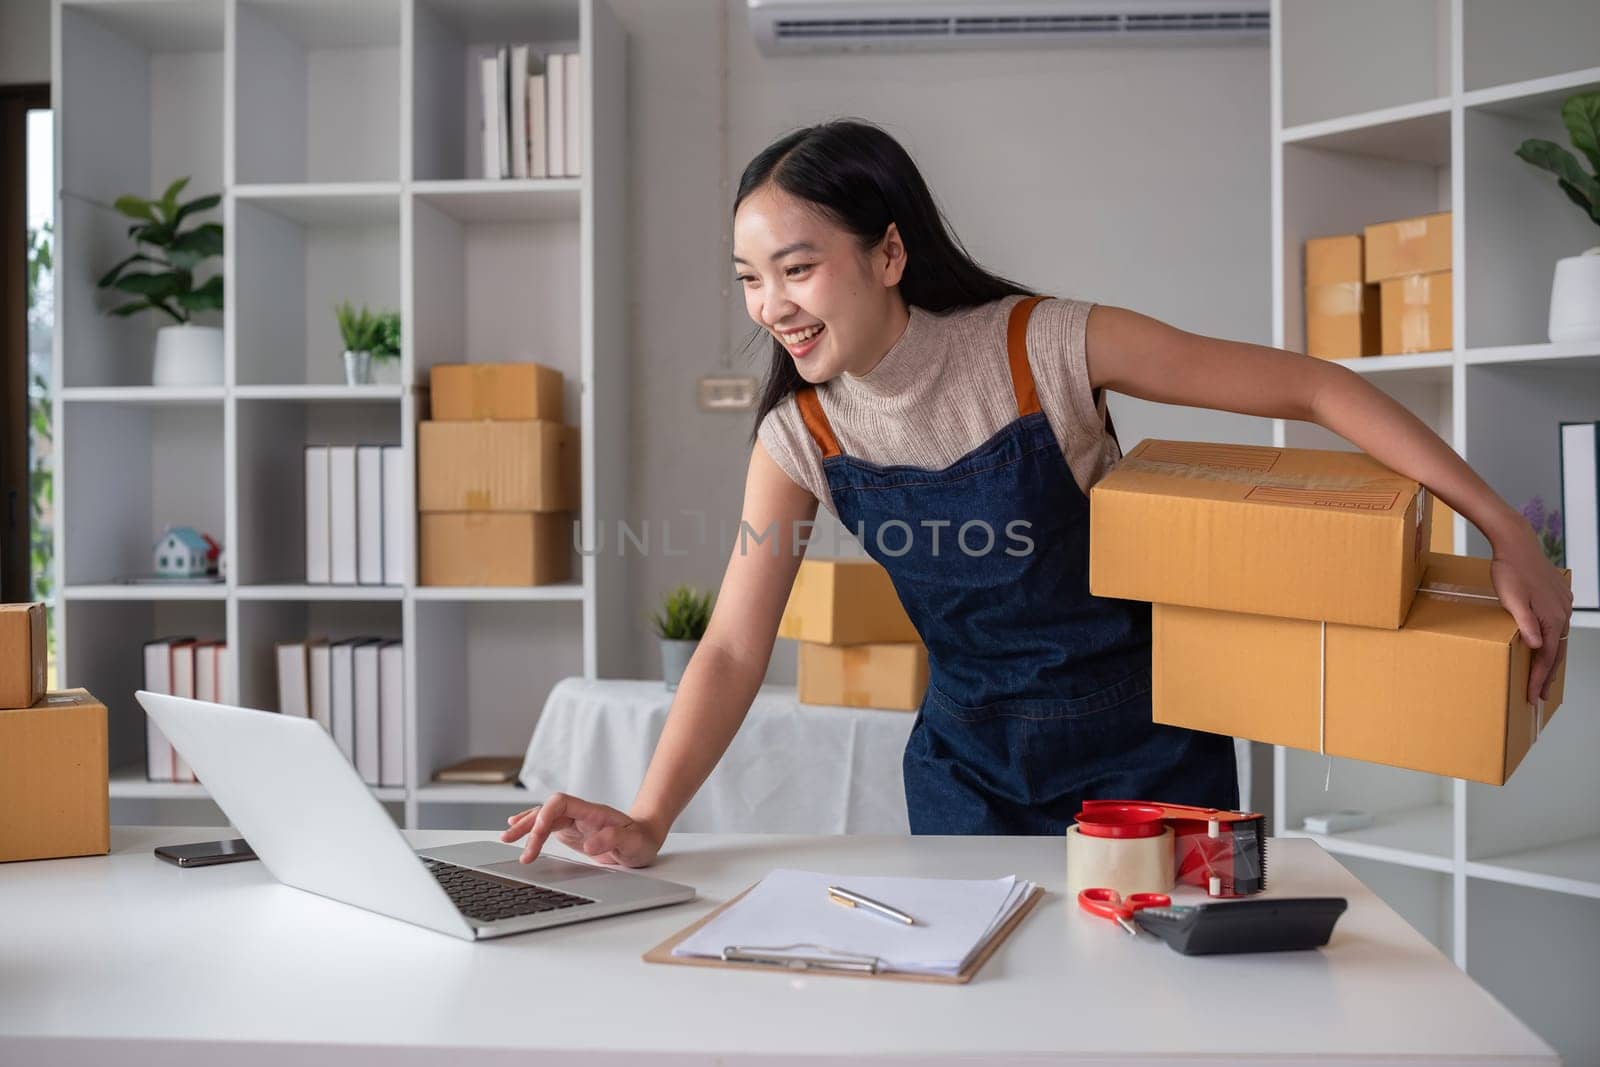 Asian women packing boxes and using a tablet in a home office. Concept of small business and e-commerce.